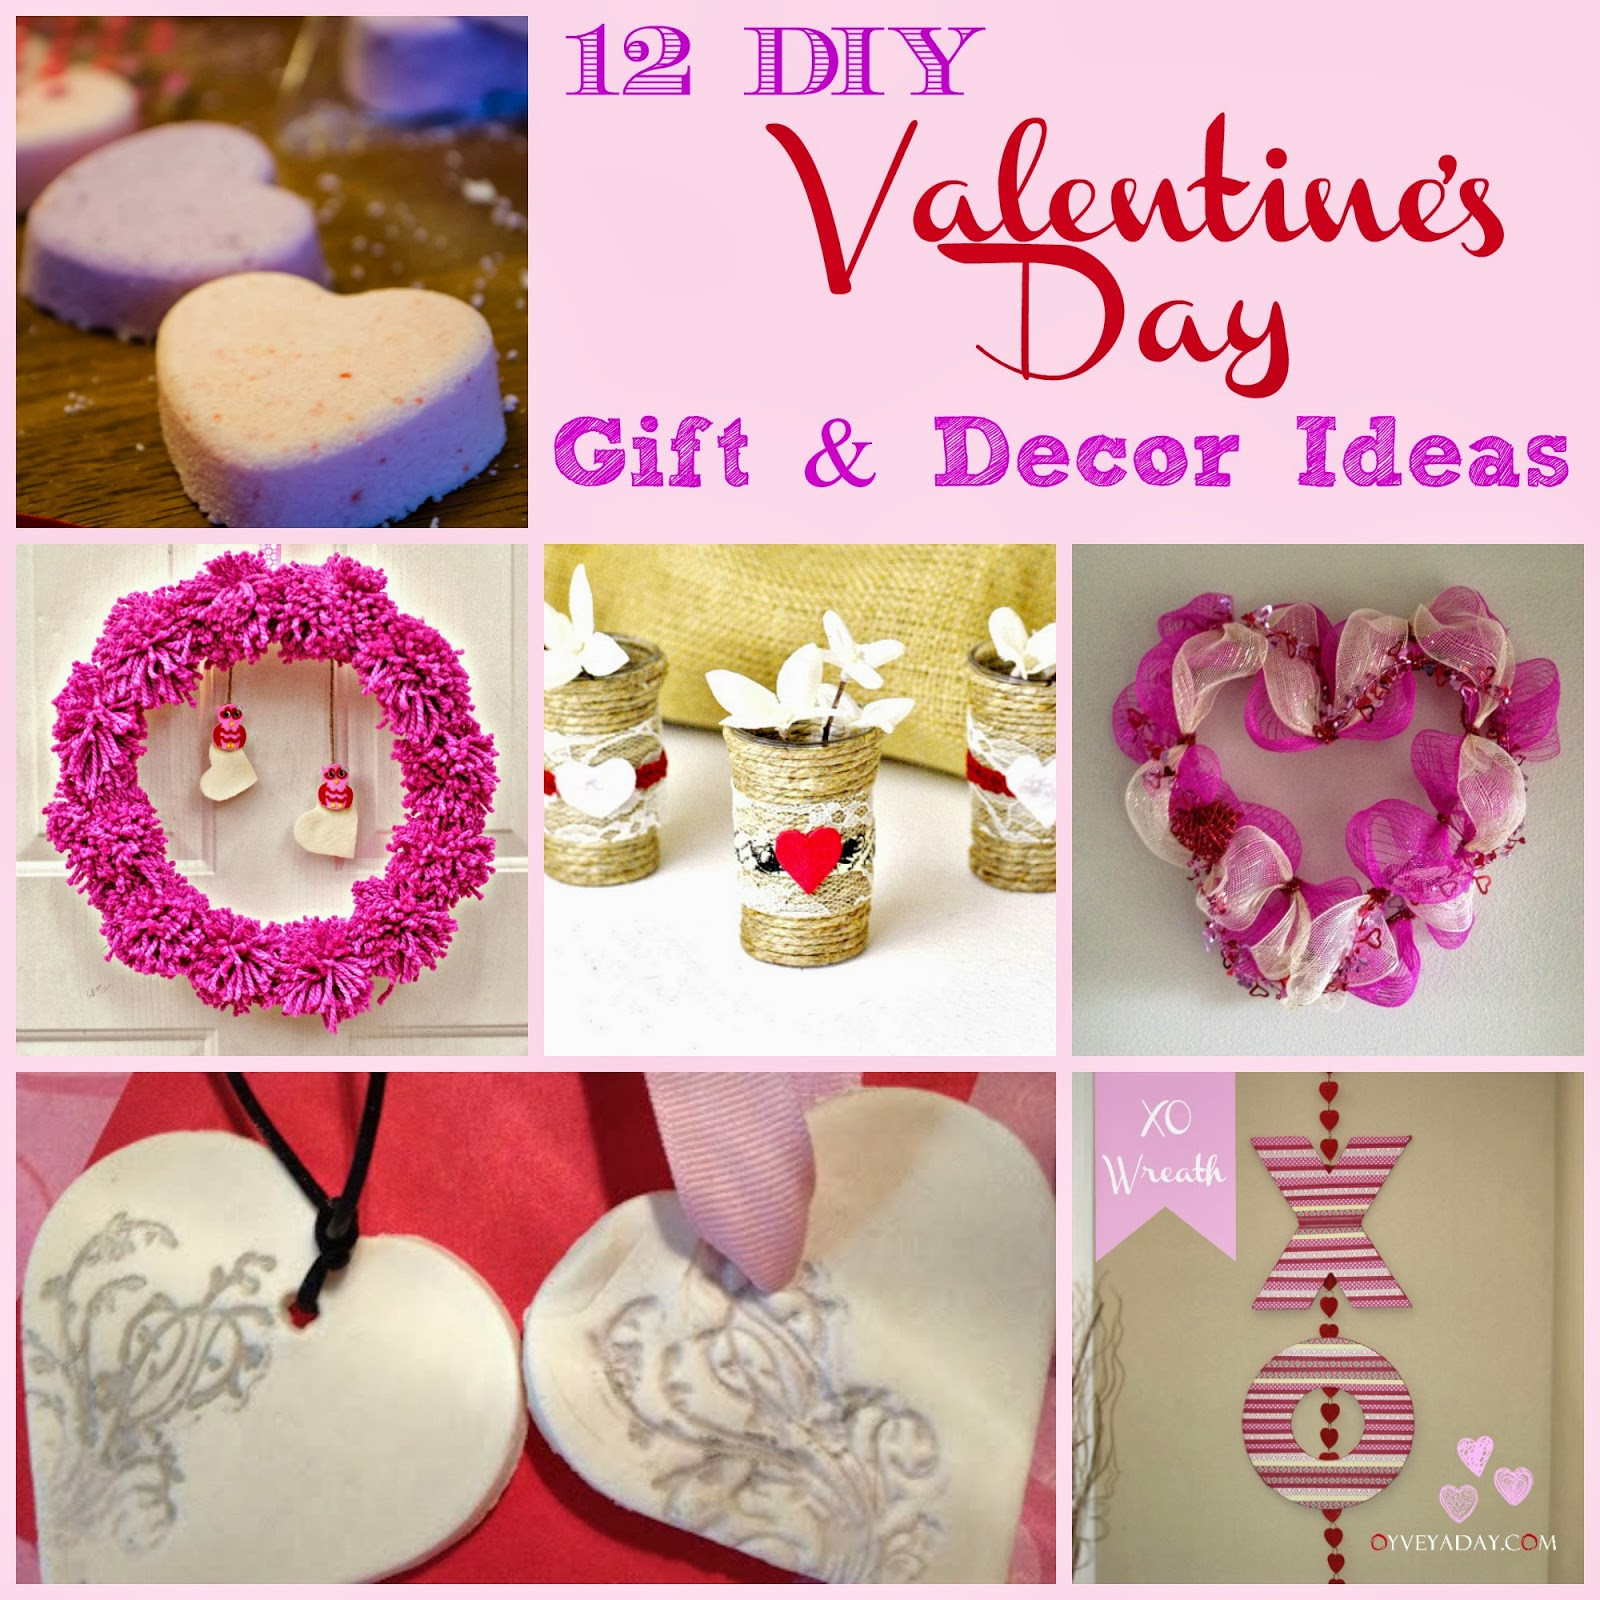 Diy Valentines Gift Ideas
 12 DIY Valentine s Day Gift & Decor Ideas Outnumbered 3 to 1